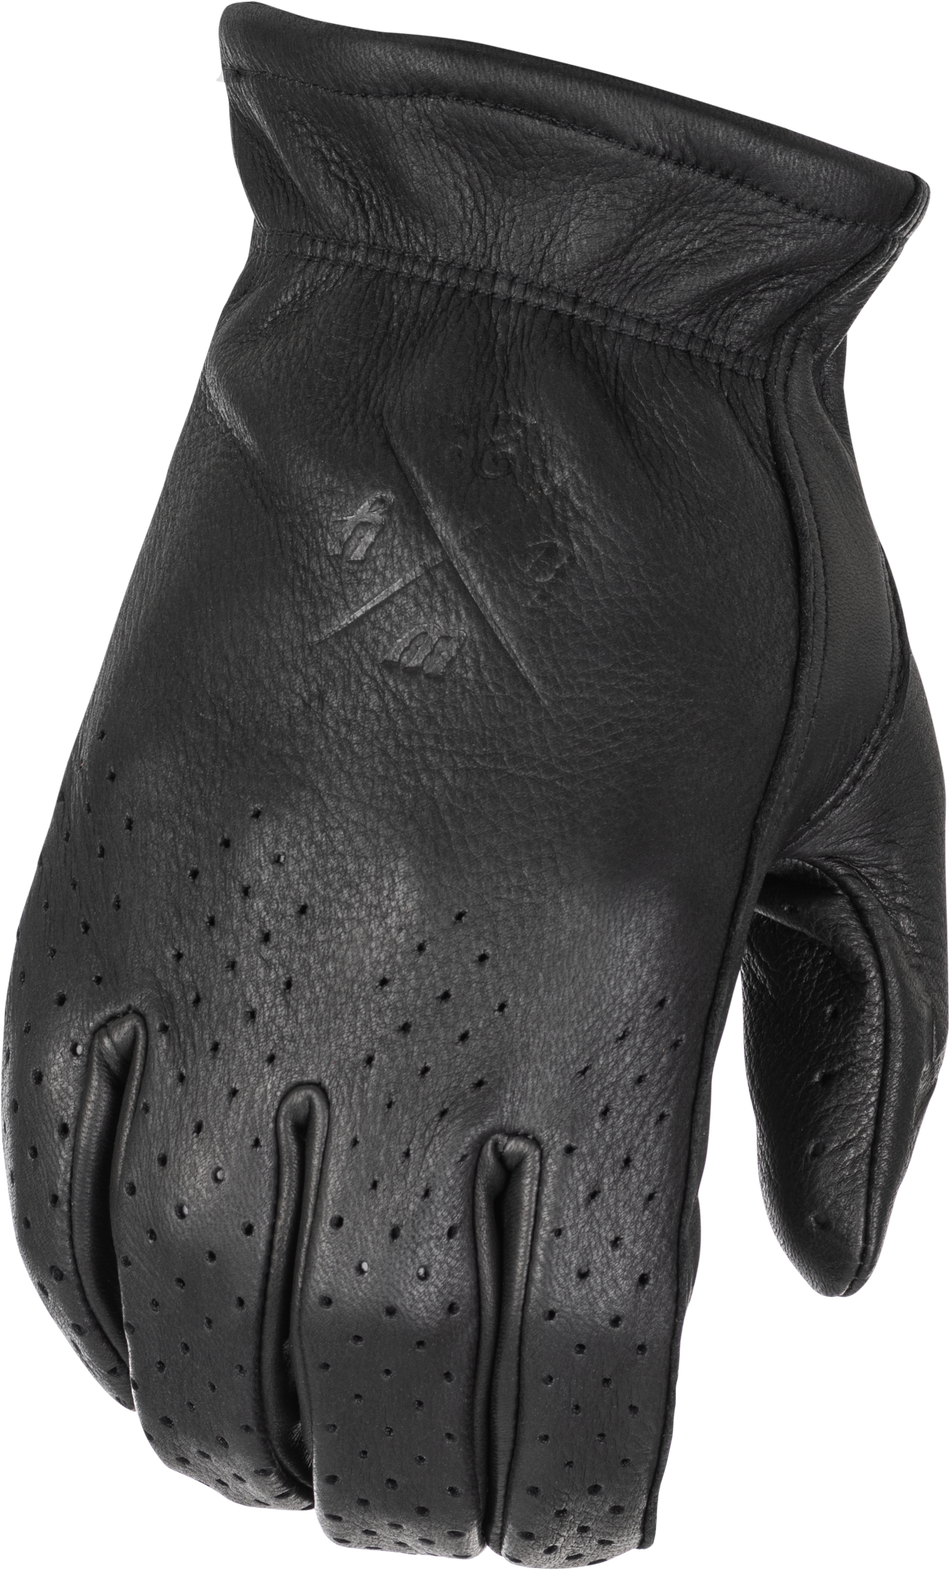 HIGHWAY 21 Louie Perforated Gloves Black Lg 489-0050L